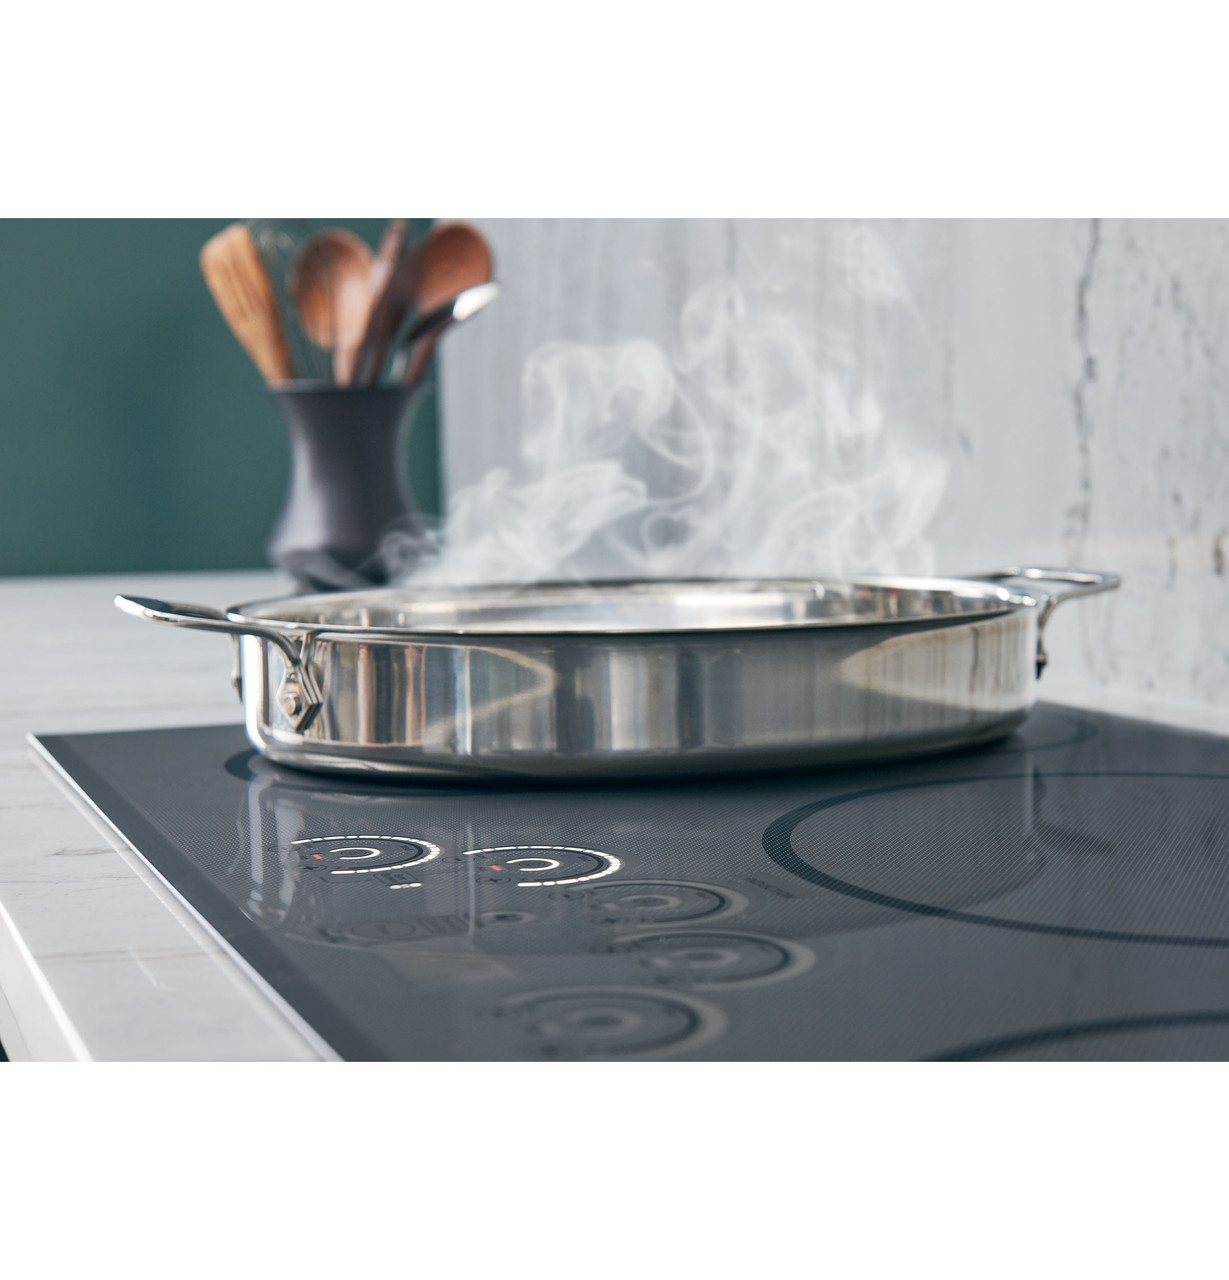 Cafe CHP90302TSS ADA 30 Touch Control Induction Cooktop